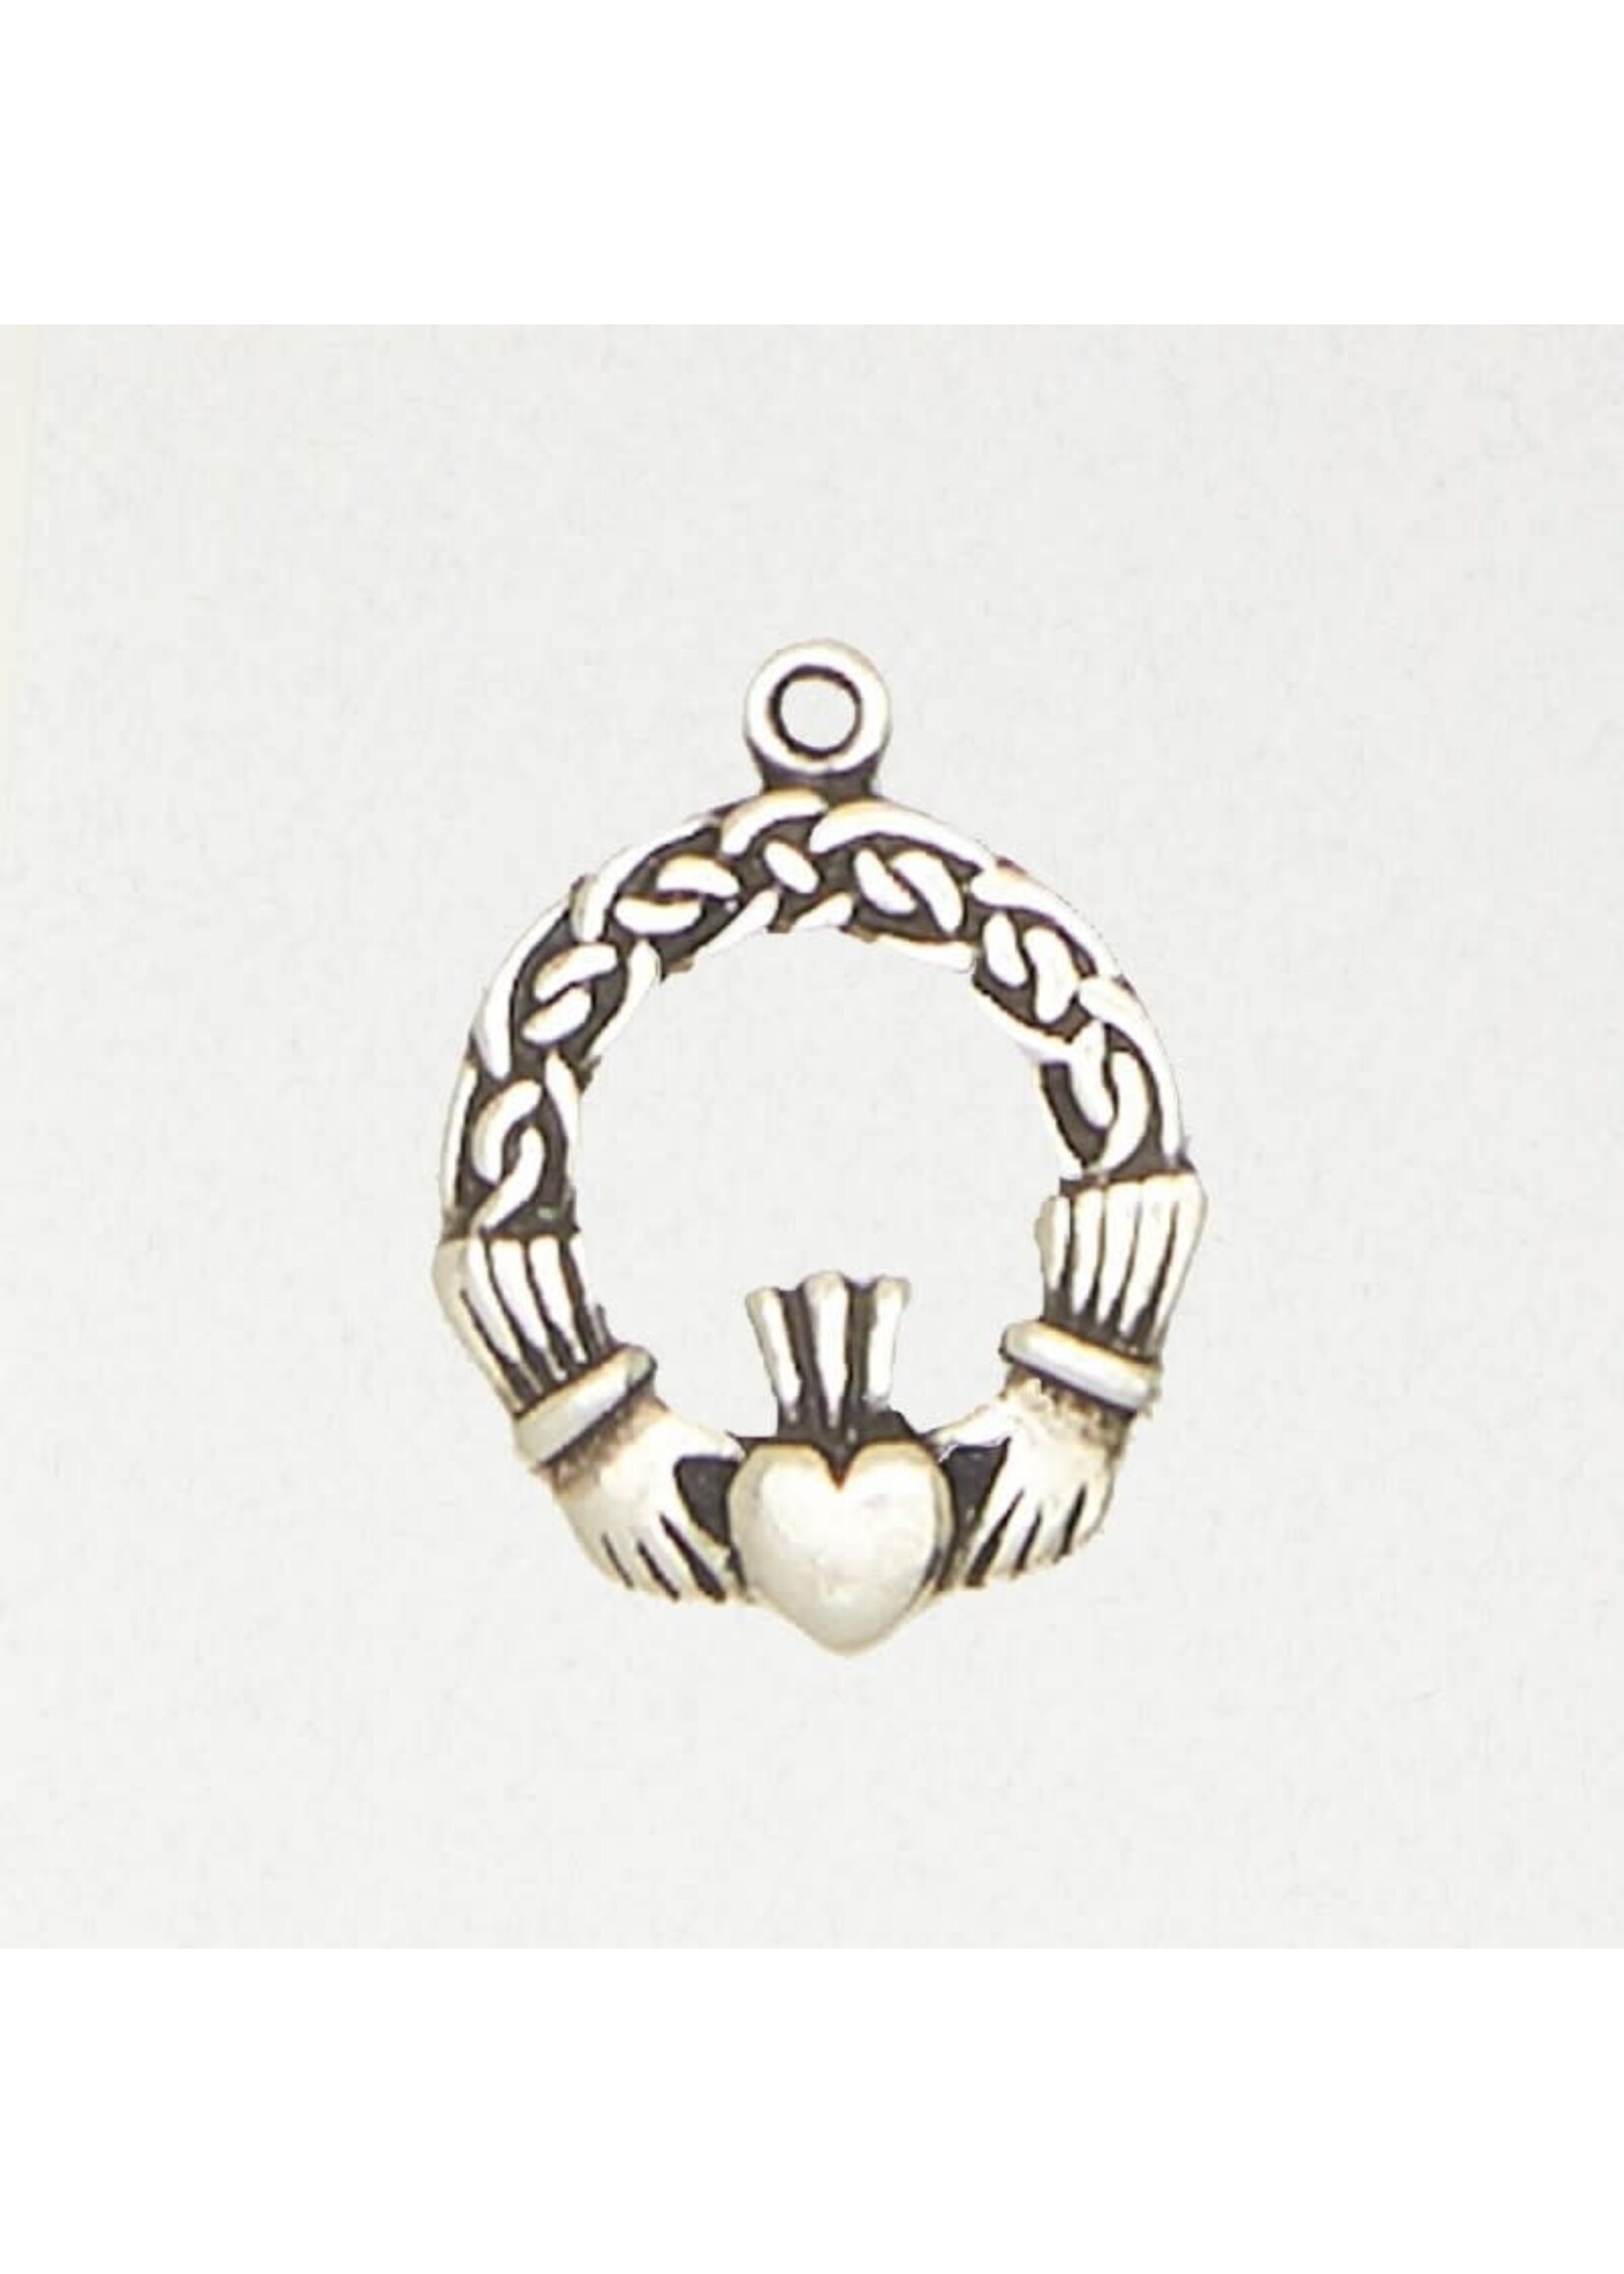 Eire Pewter Pendant - Claddagh Heart